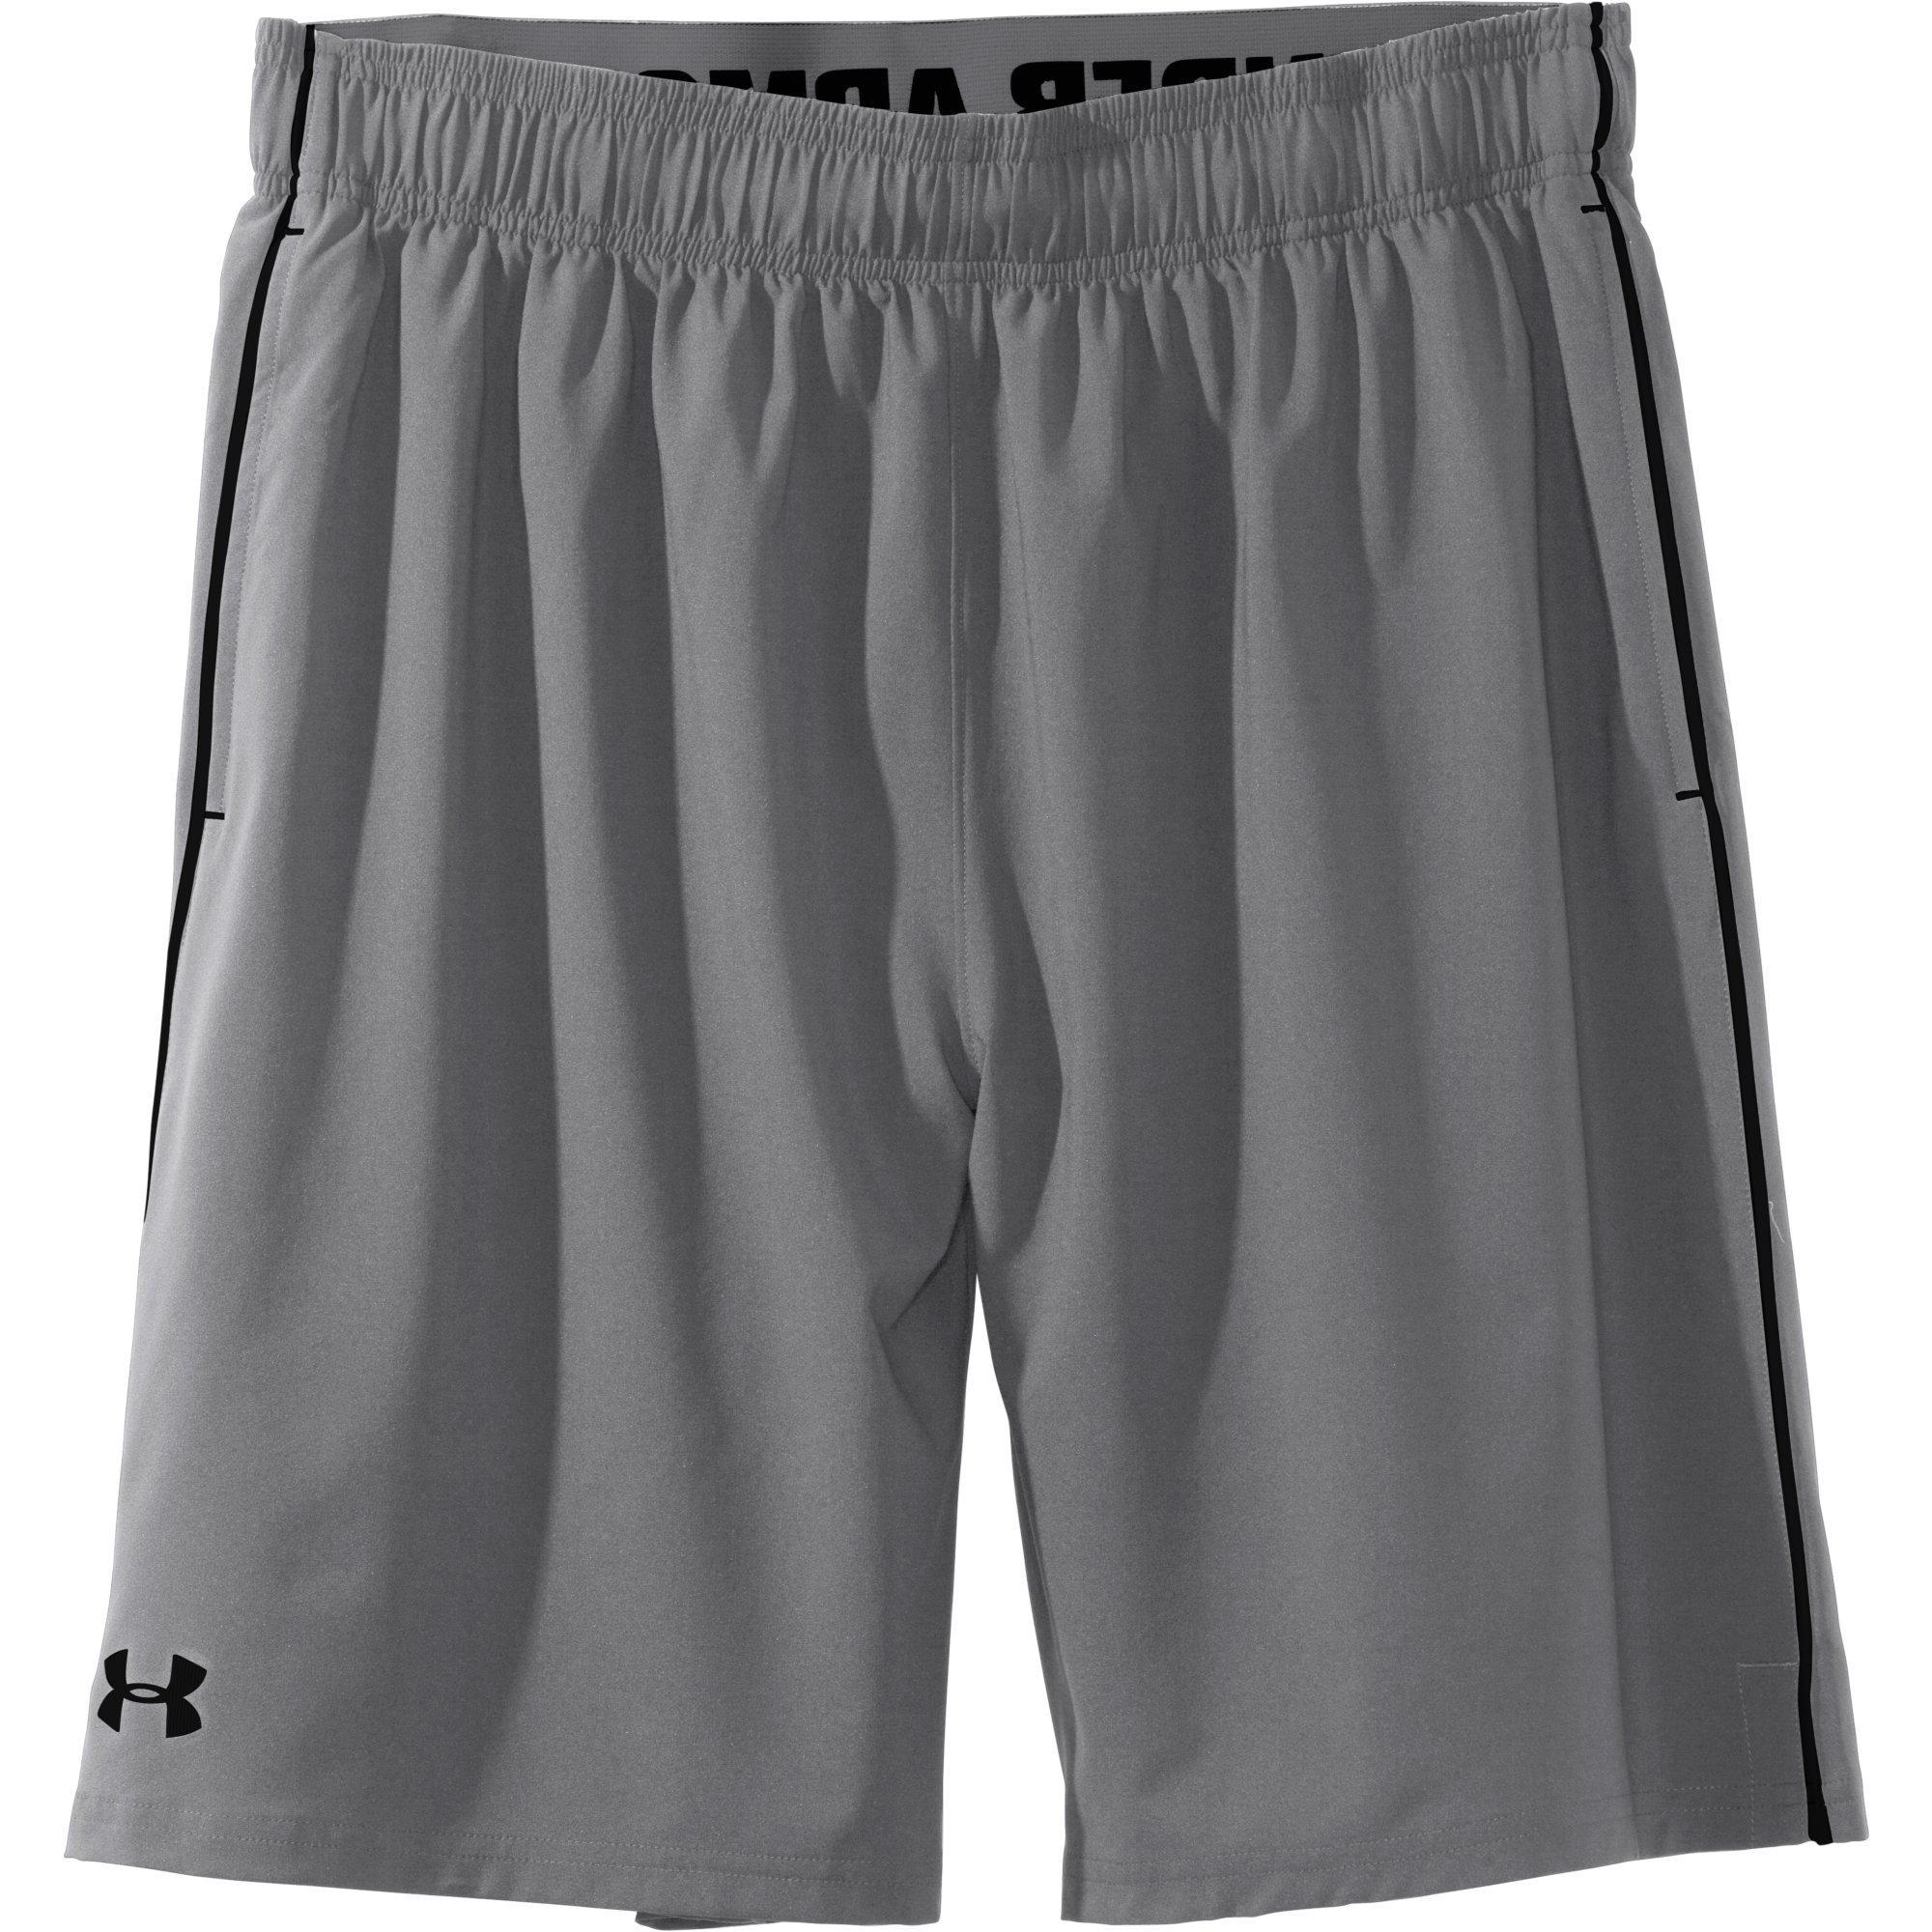 under armour mirage 8 inch shorts mens